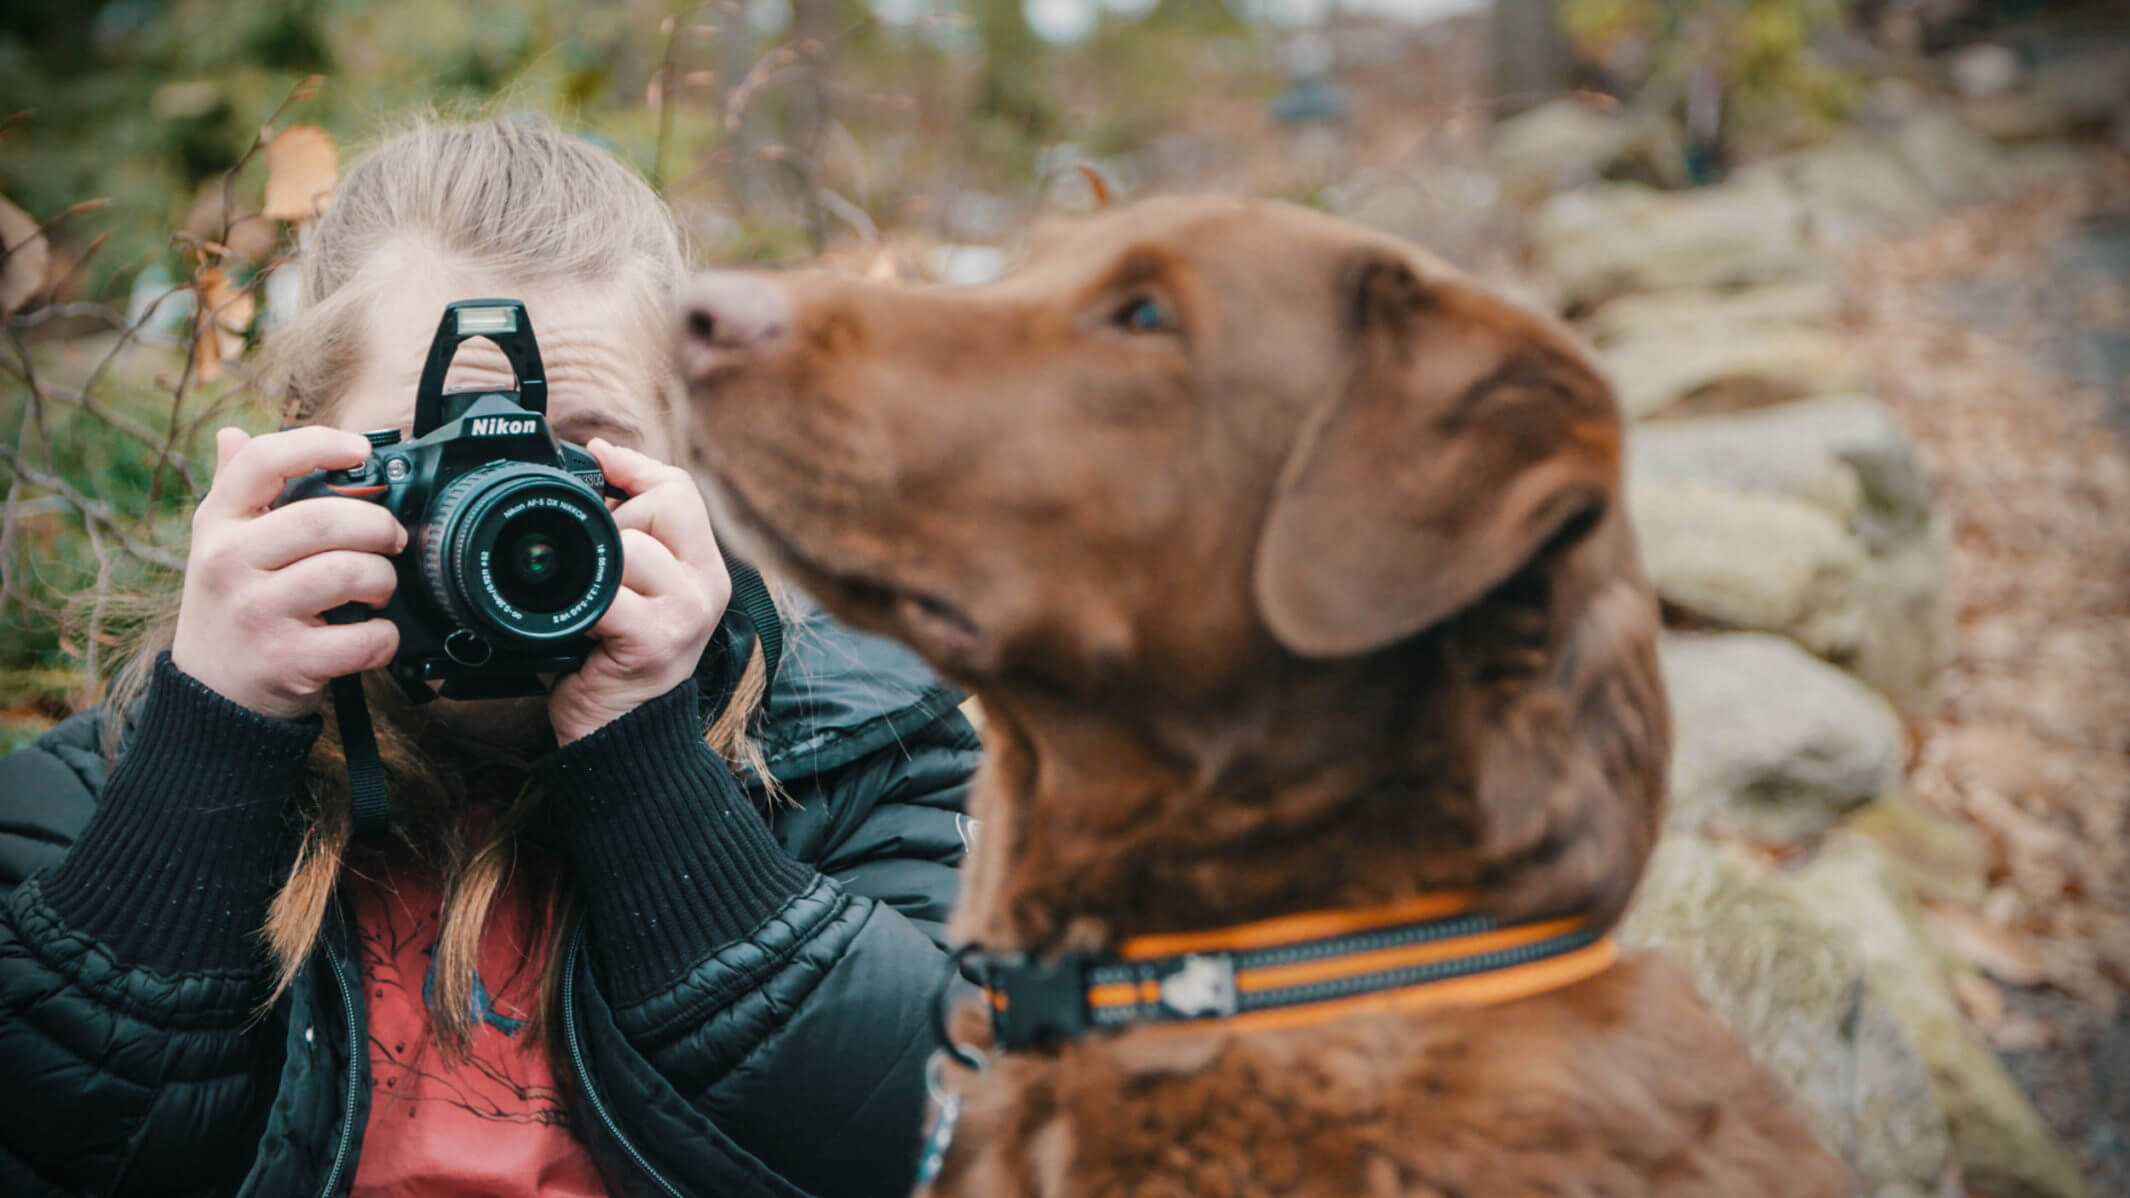 Kate takes a photograph of her dog, a chocolate labrador.